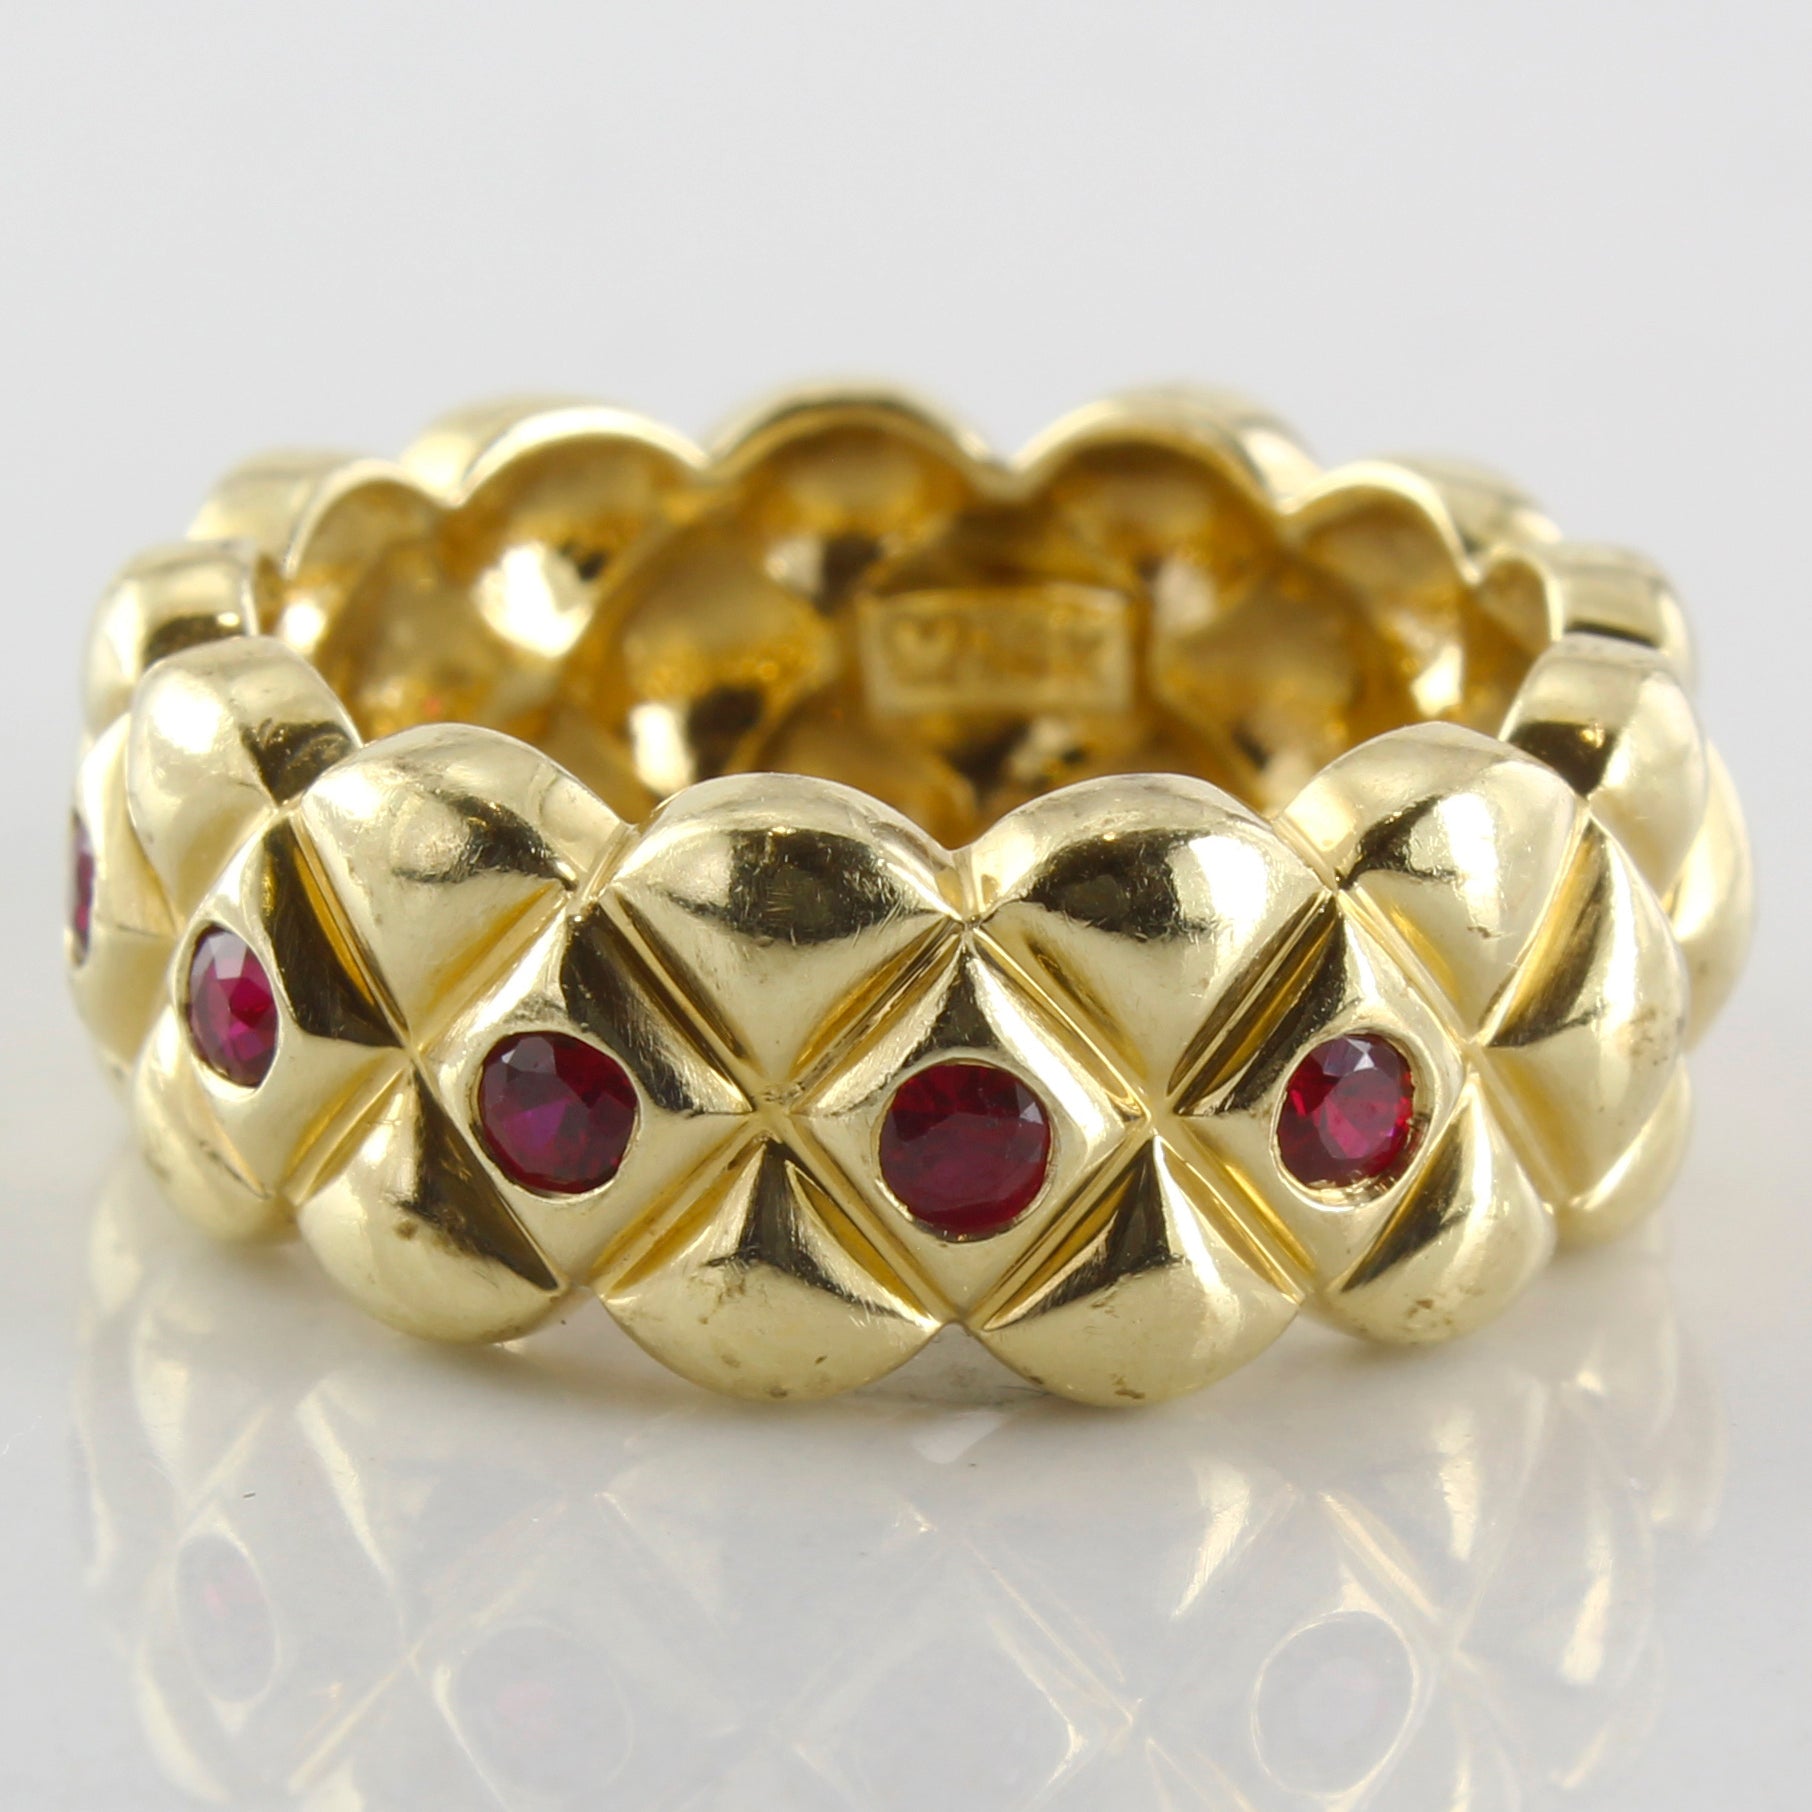 Pillow Patterned Ruby Ring | 0.25ctw | SZ 6.25 |